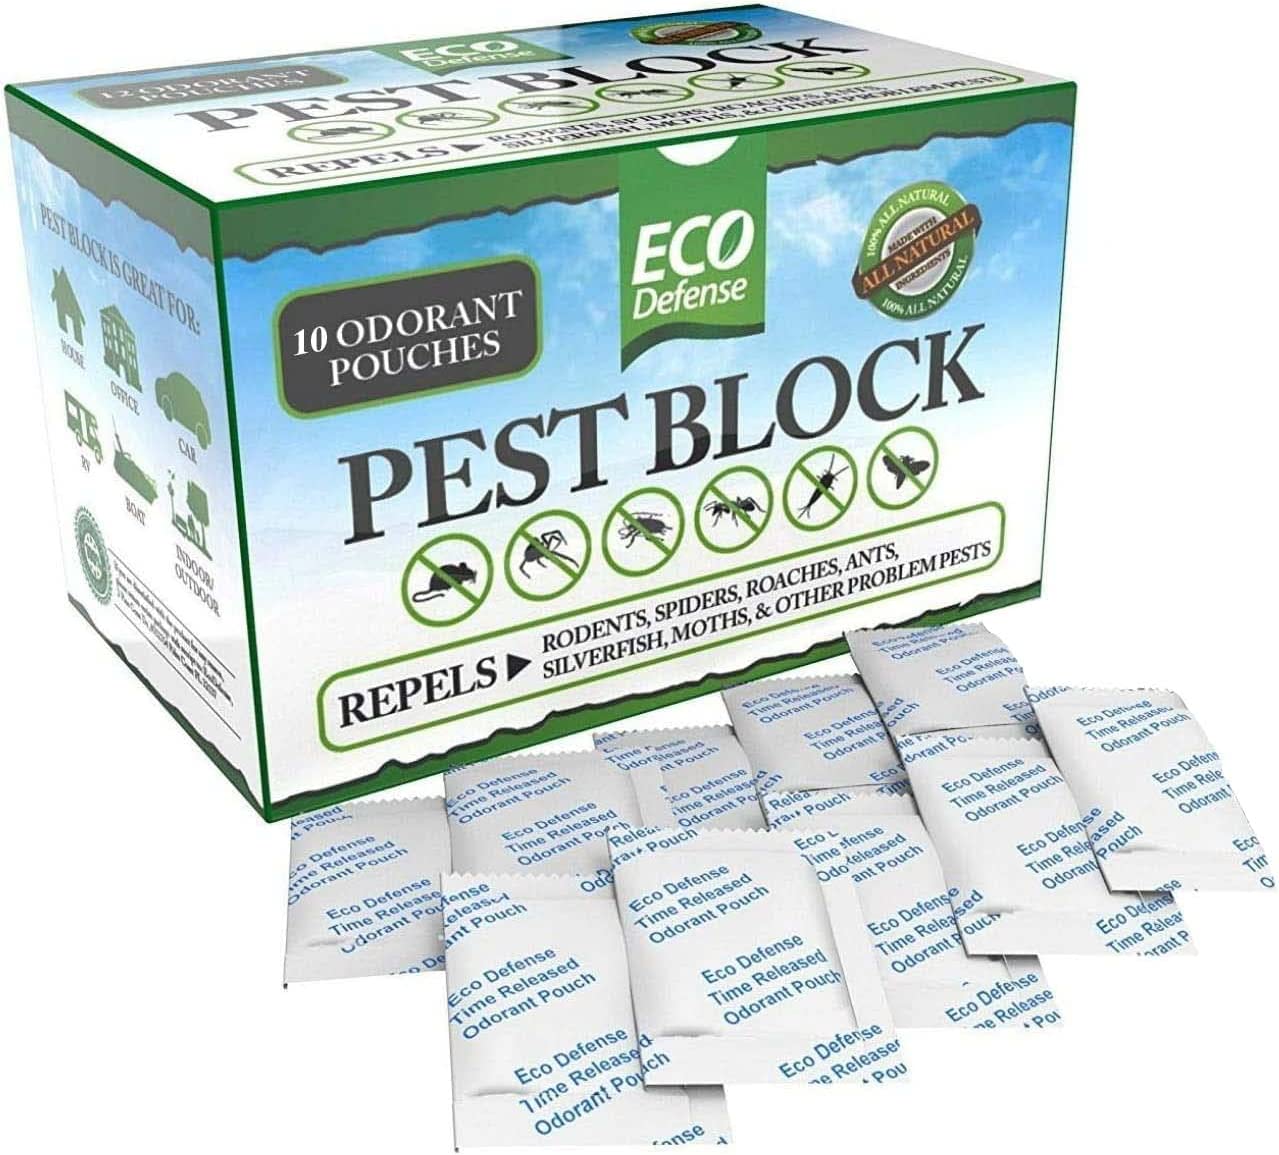 Eco Pro Pest Control Rat and Mouse Bait Station 2 Pack - Quickly